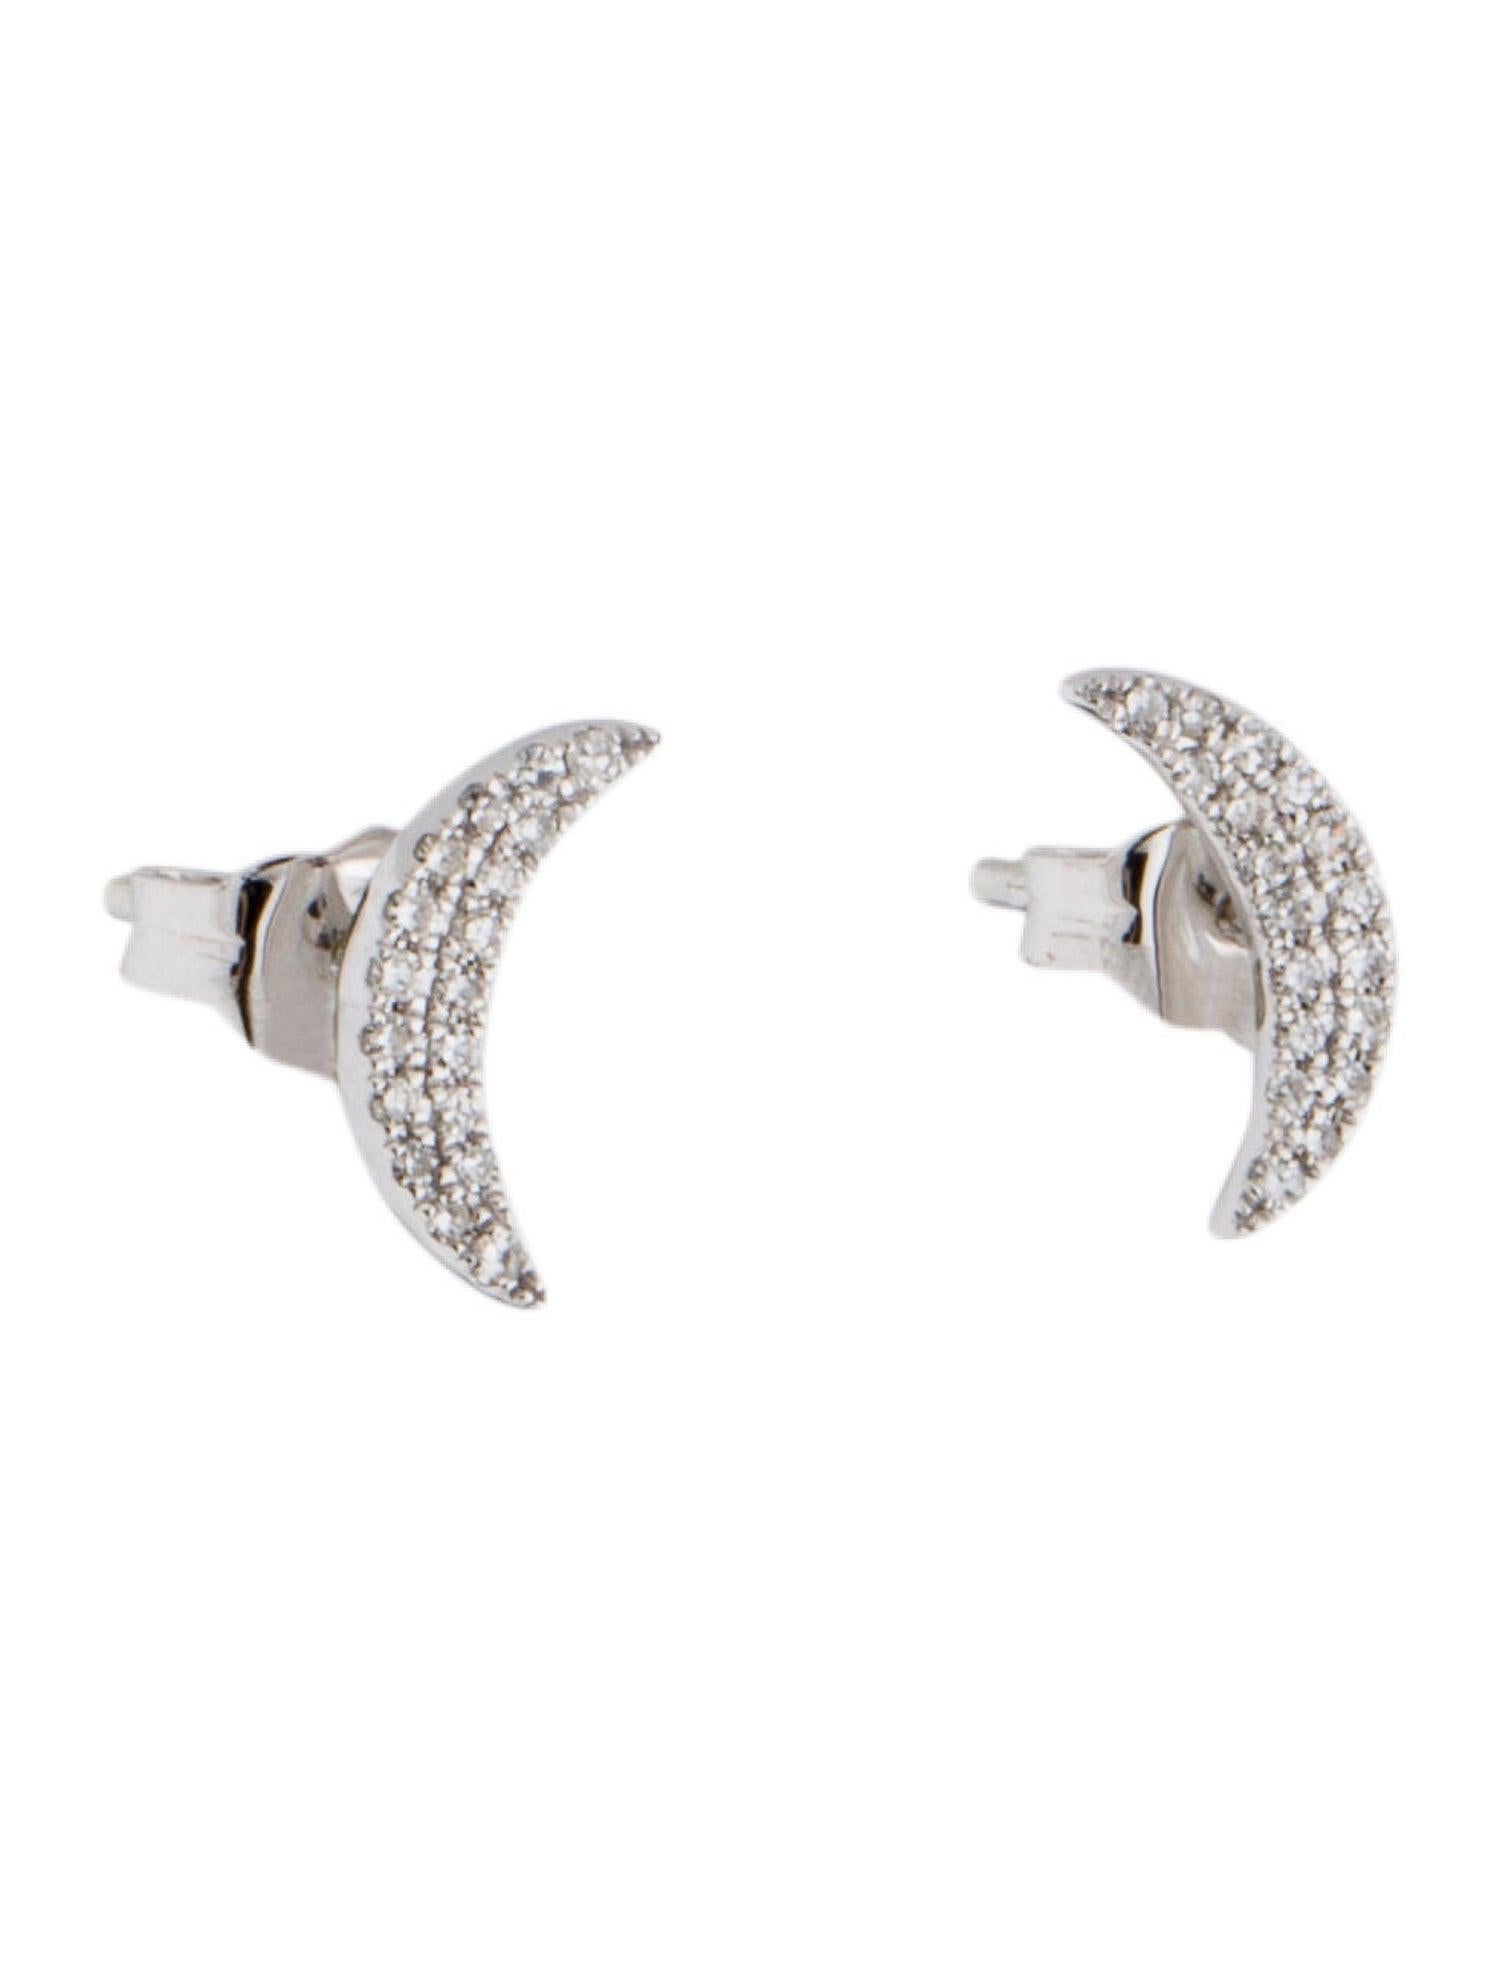 Pretty and classic diamond moon Studs earrings featuring approximately 0.12ct of genuine white diamonds crafted of 14k gold. These are available in white and yellow gold. Secured with butterfly backs.  Diamond color and Clarity GH SI1-SI2 
-14K